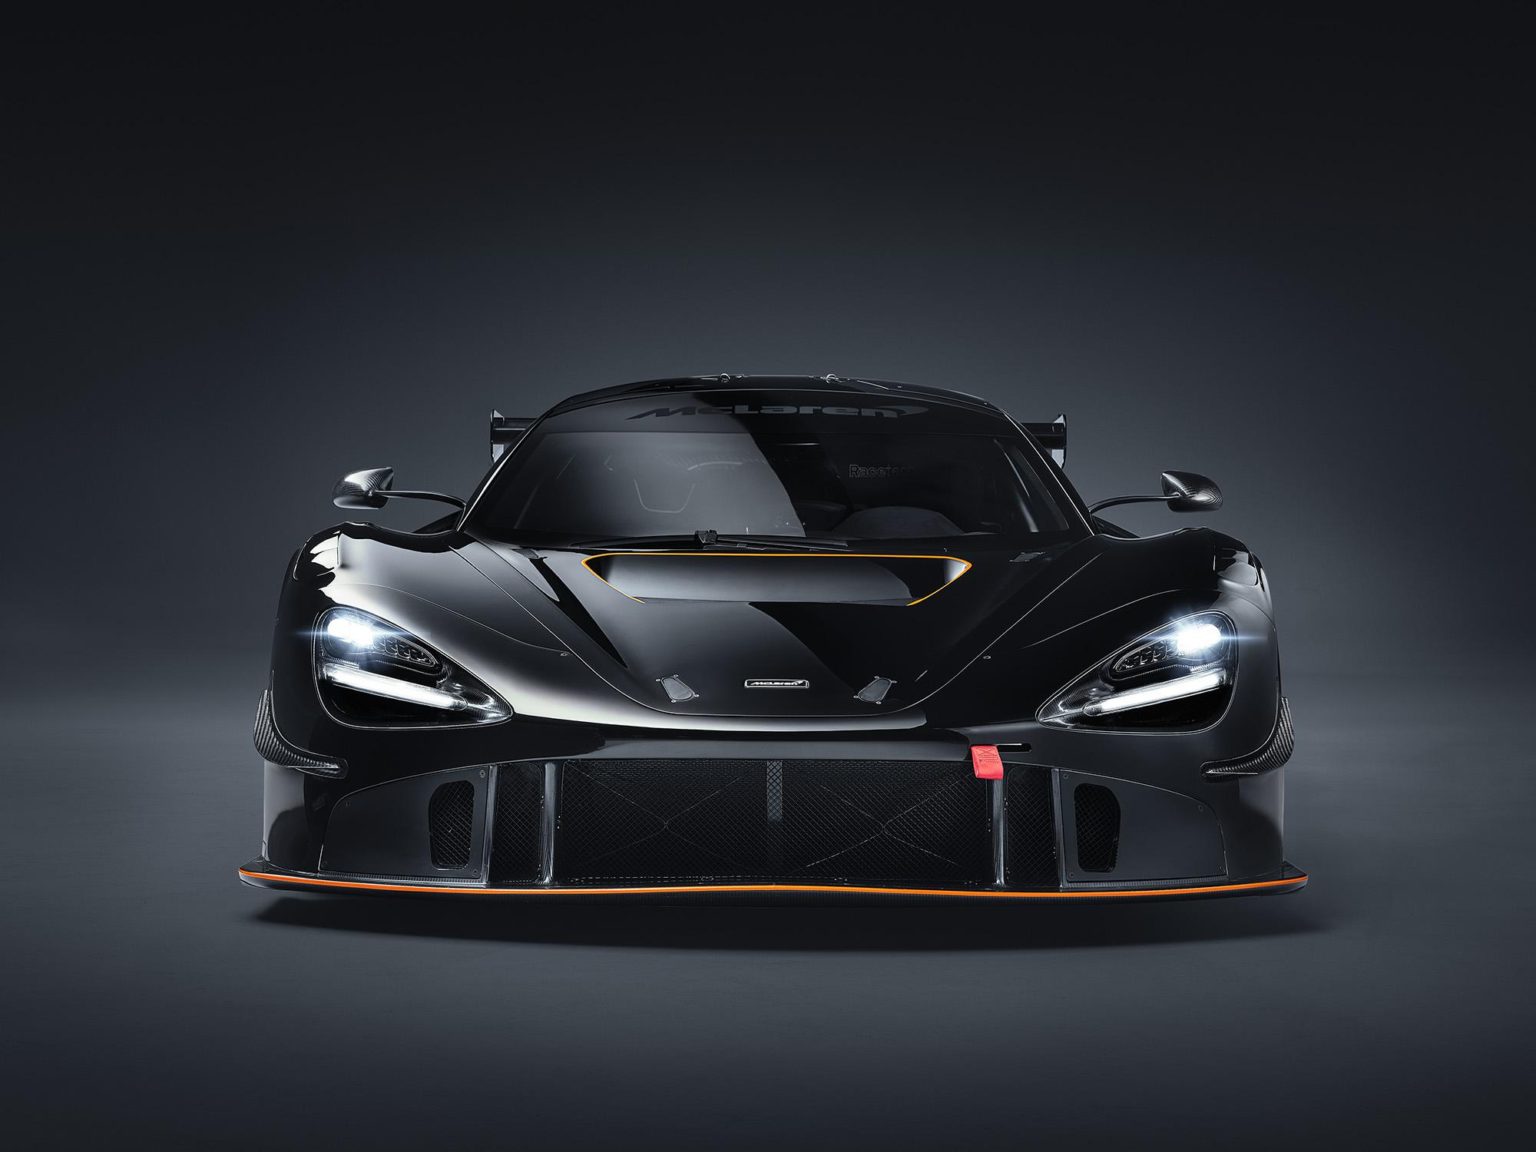 The McLaren 720S GT3 is a track-ready supercar.